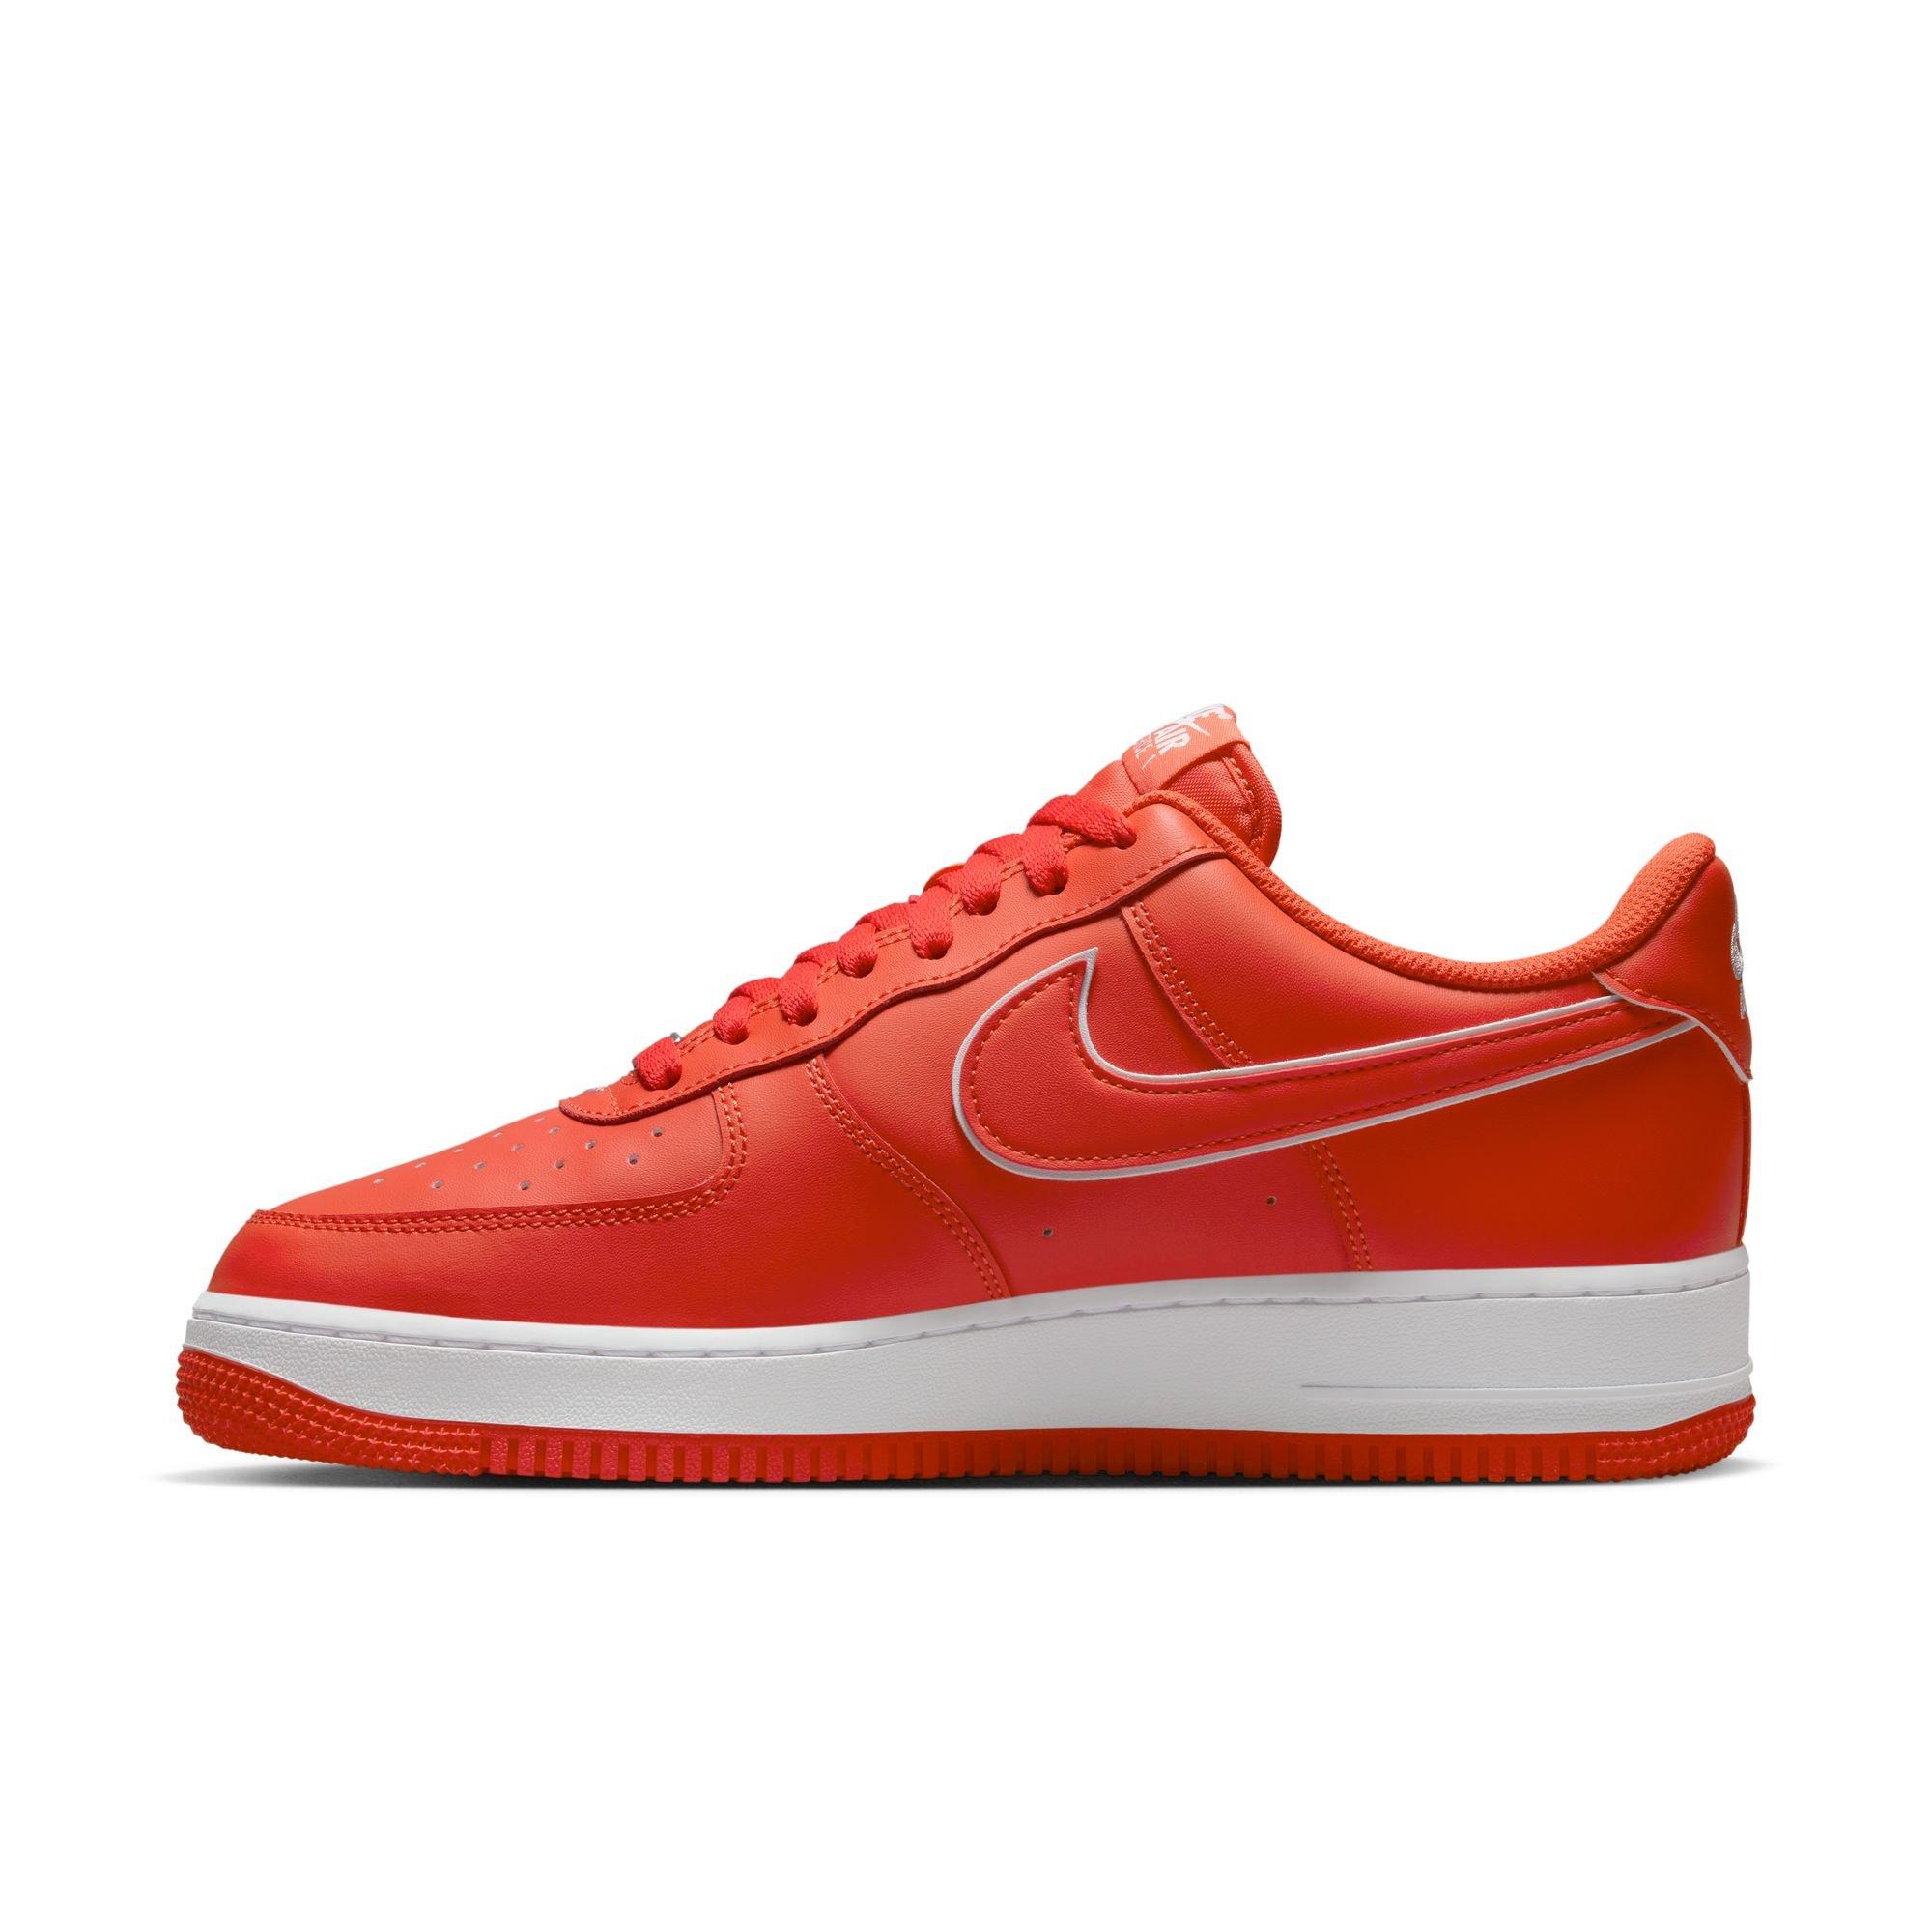 Men's Nike Picante Red Air Force 1 Now Available In Men's Sizing. 🔥🔥